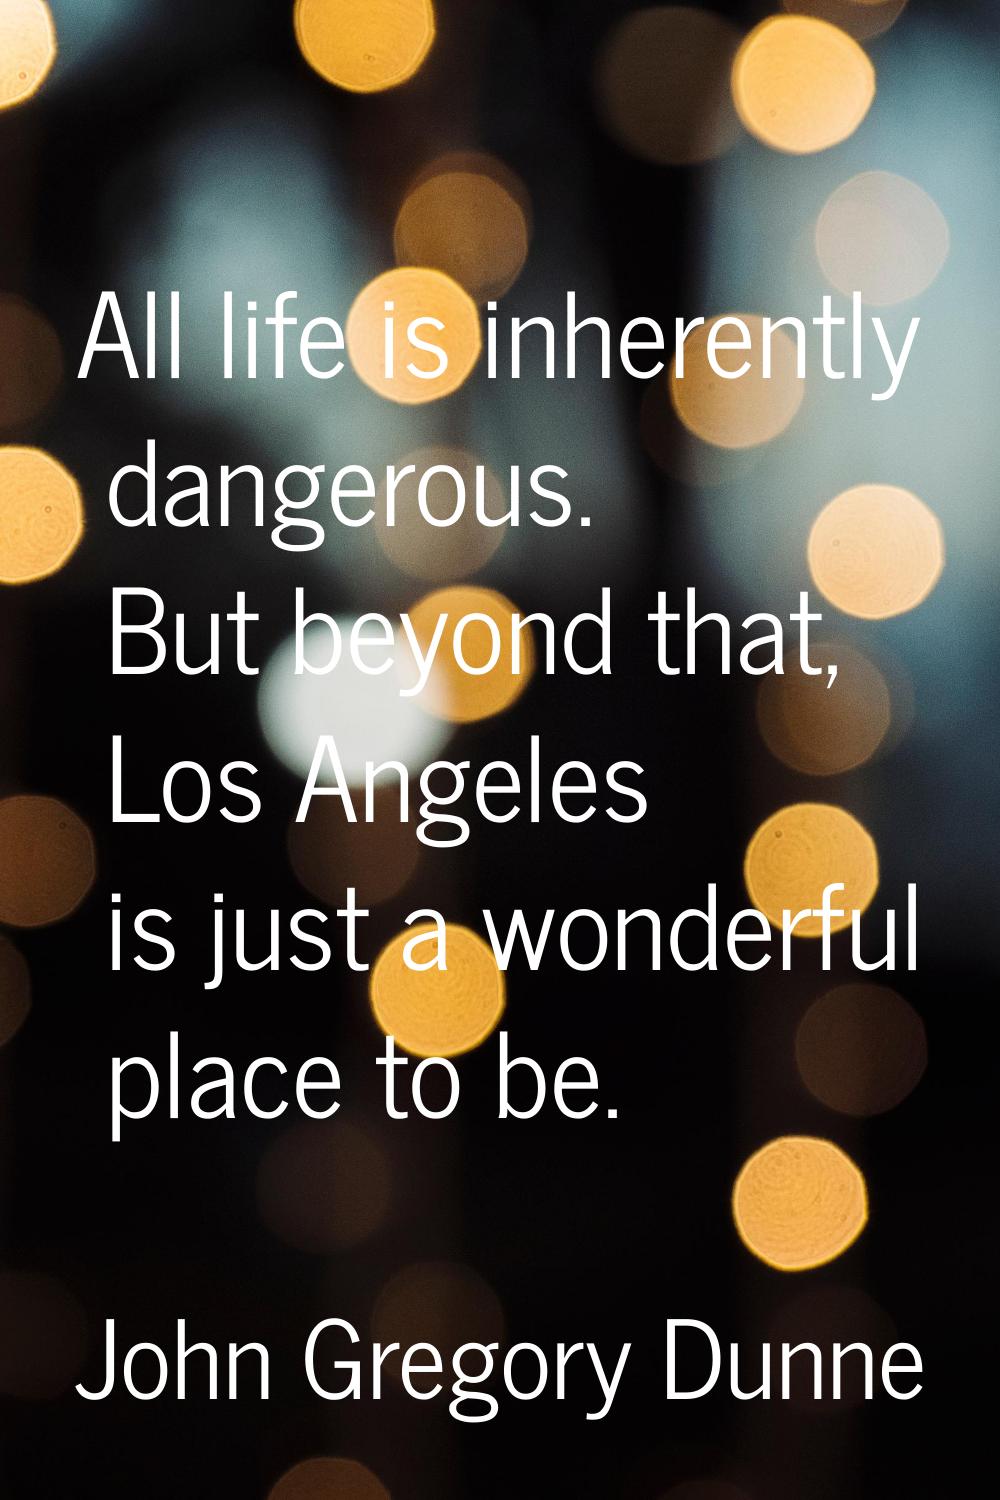 All life is inherently dangerous. But beyond that, Los Angeles is just a wonderful place to be.